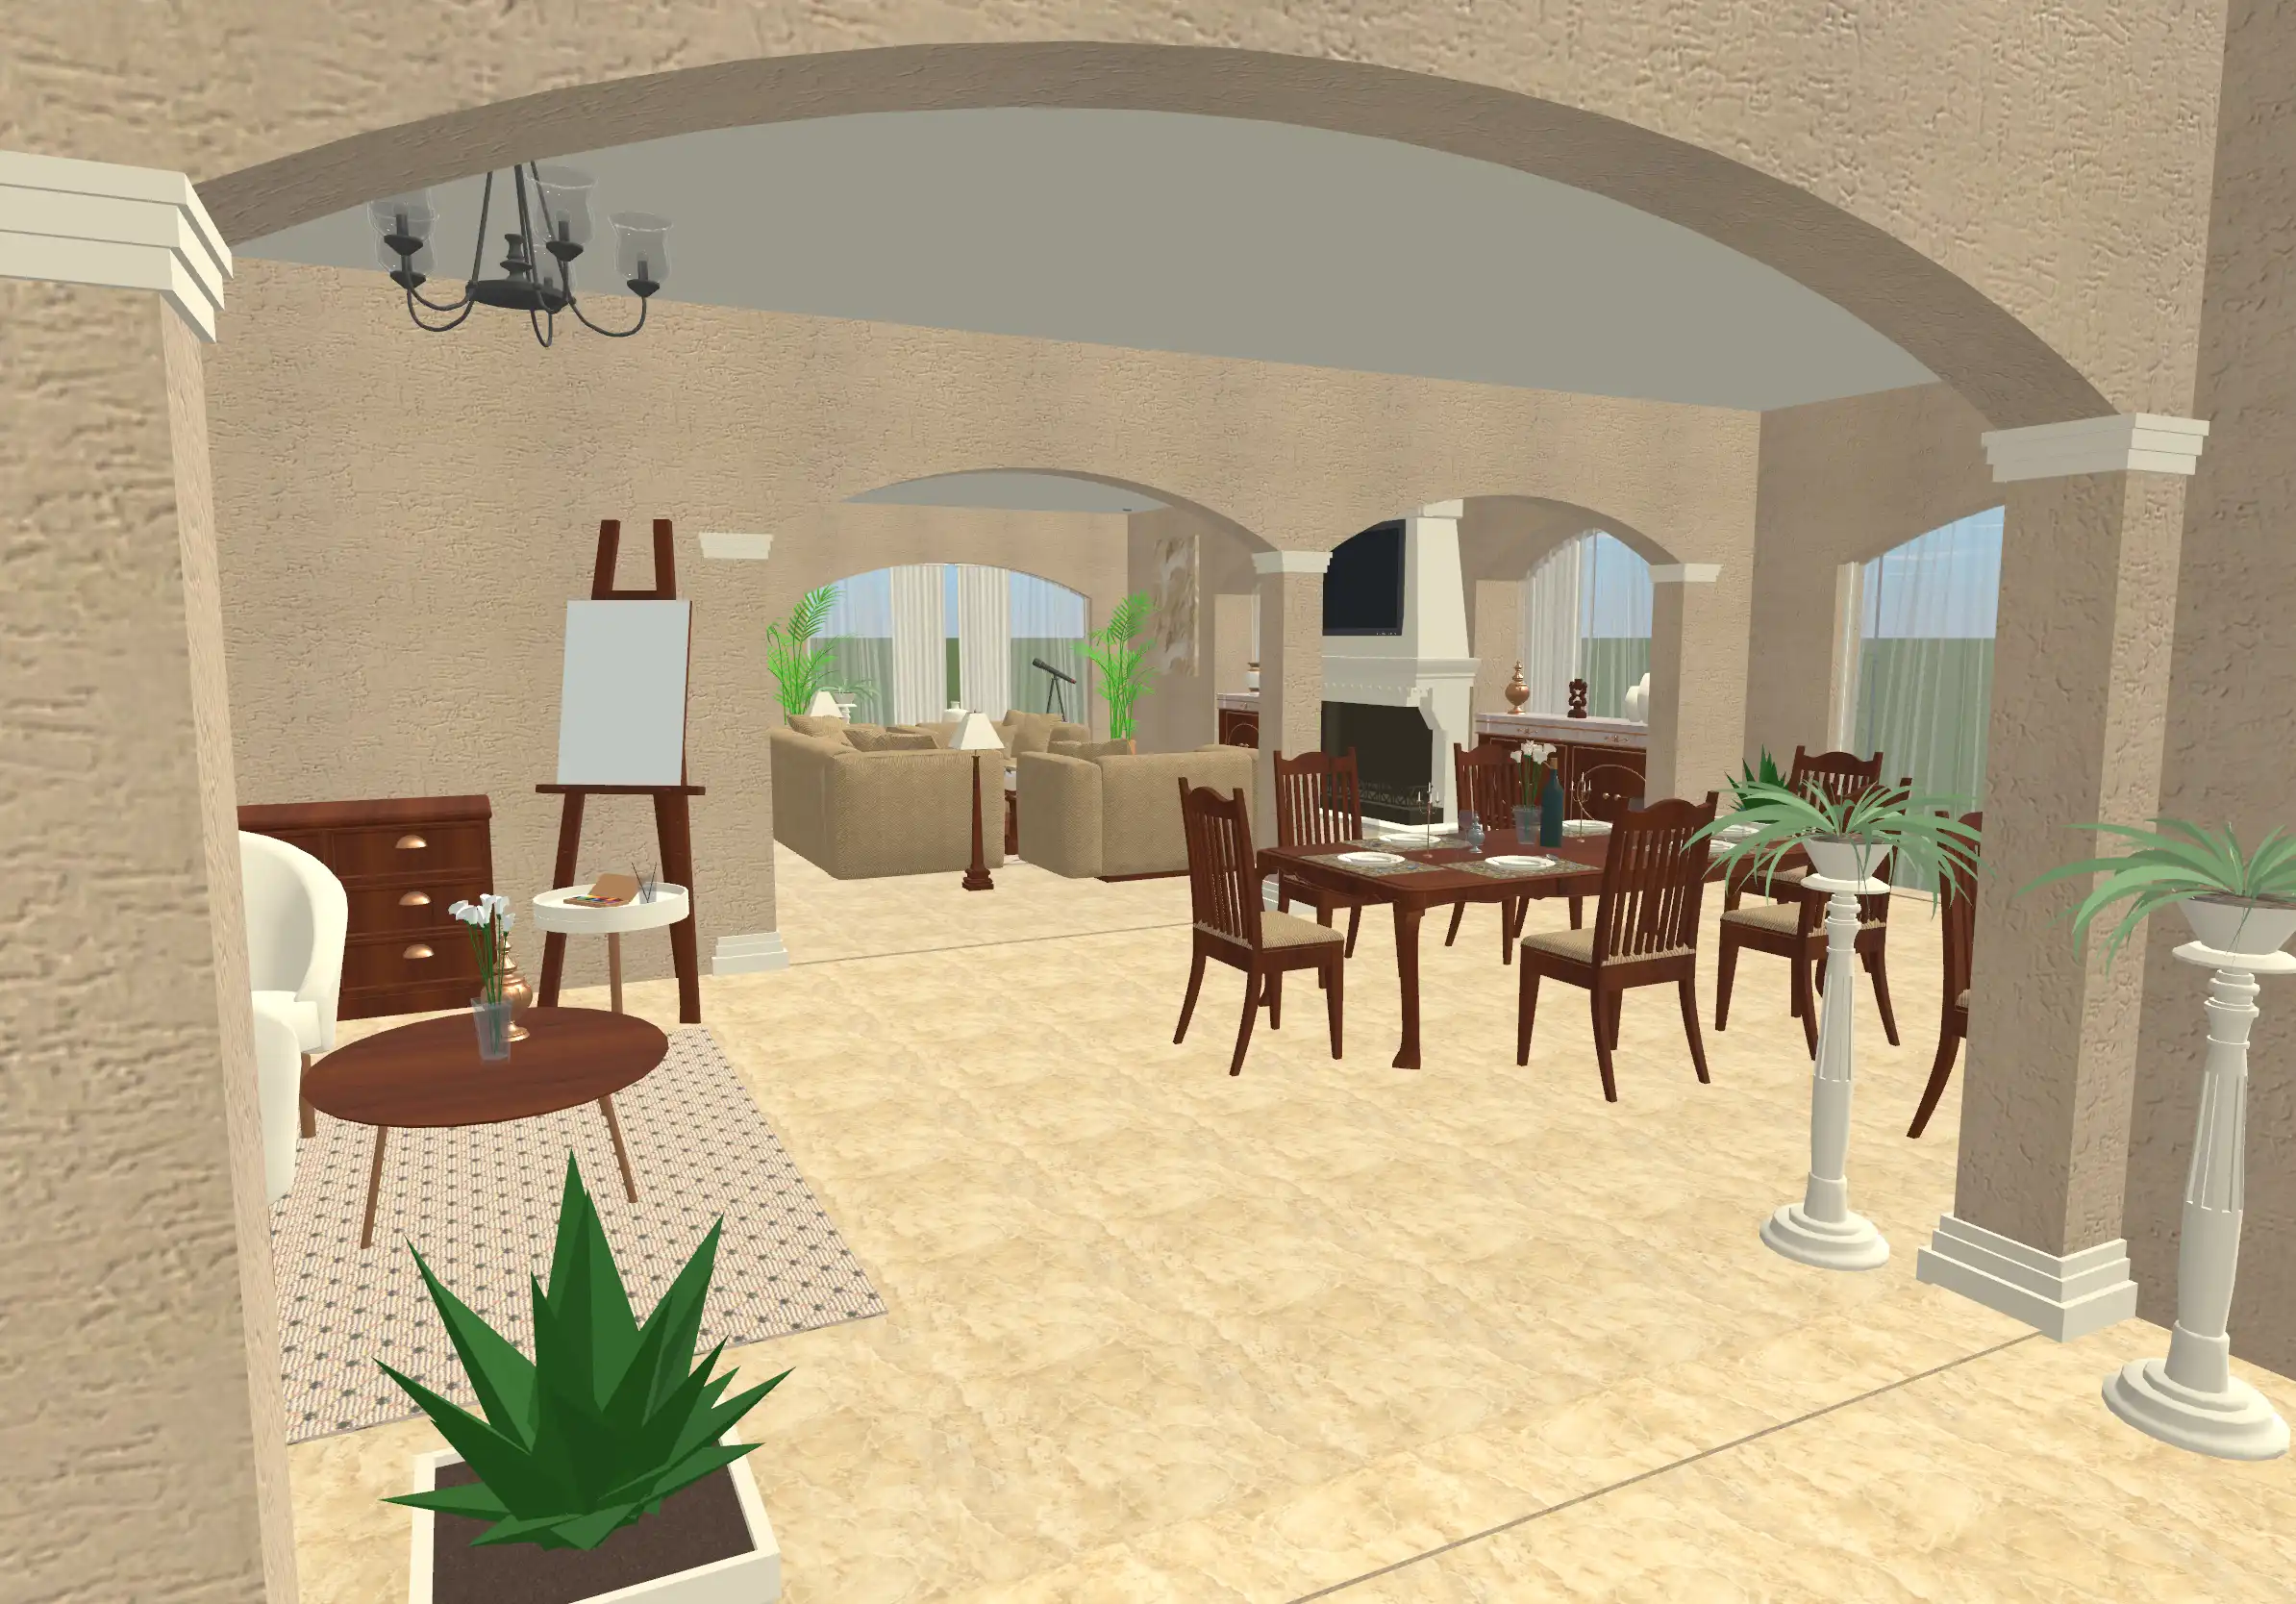 Penthouse, dining room